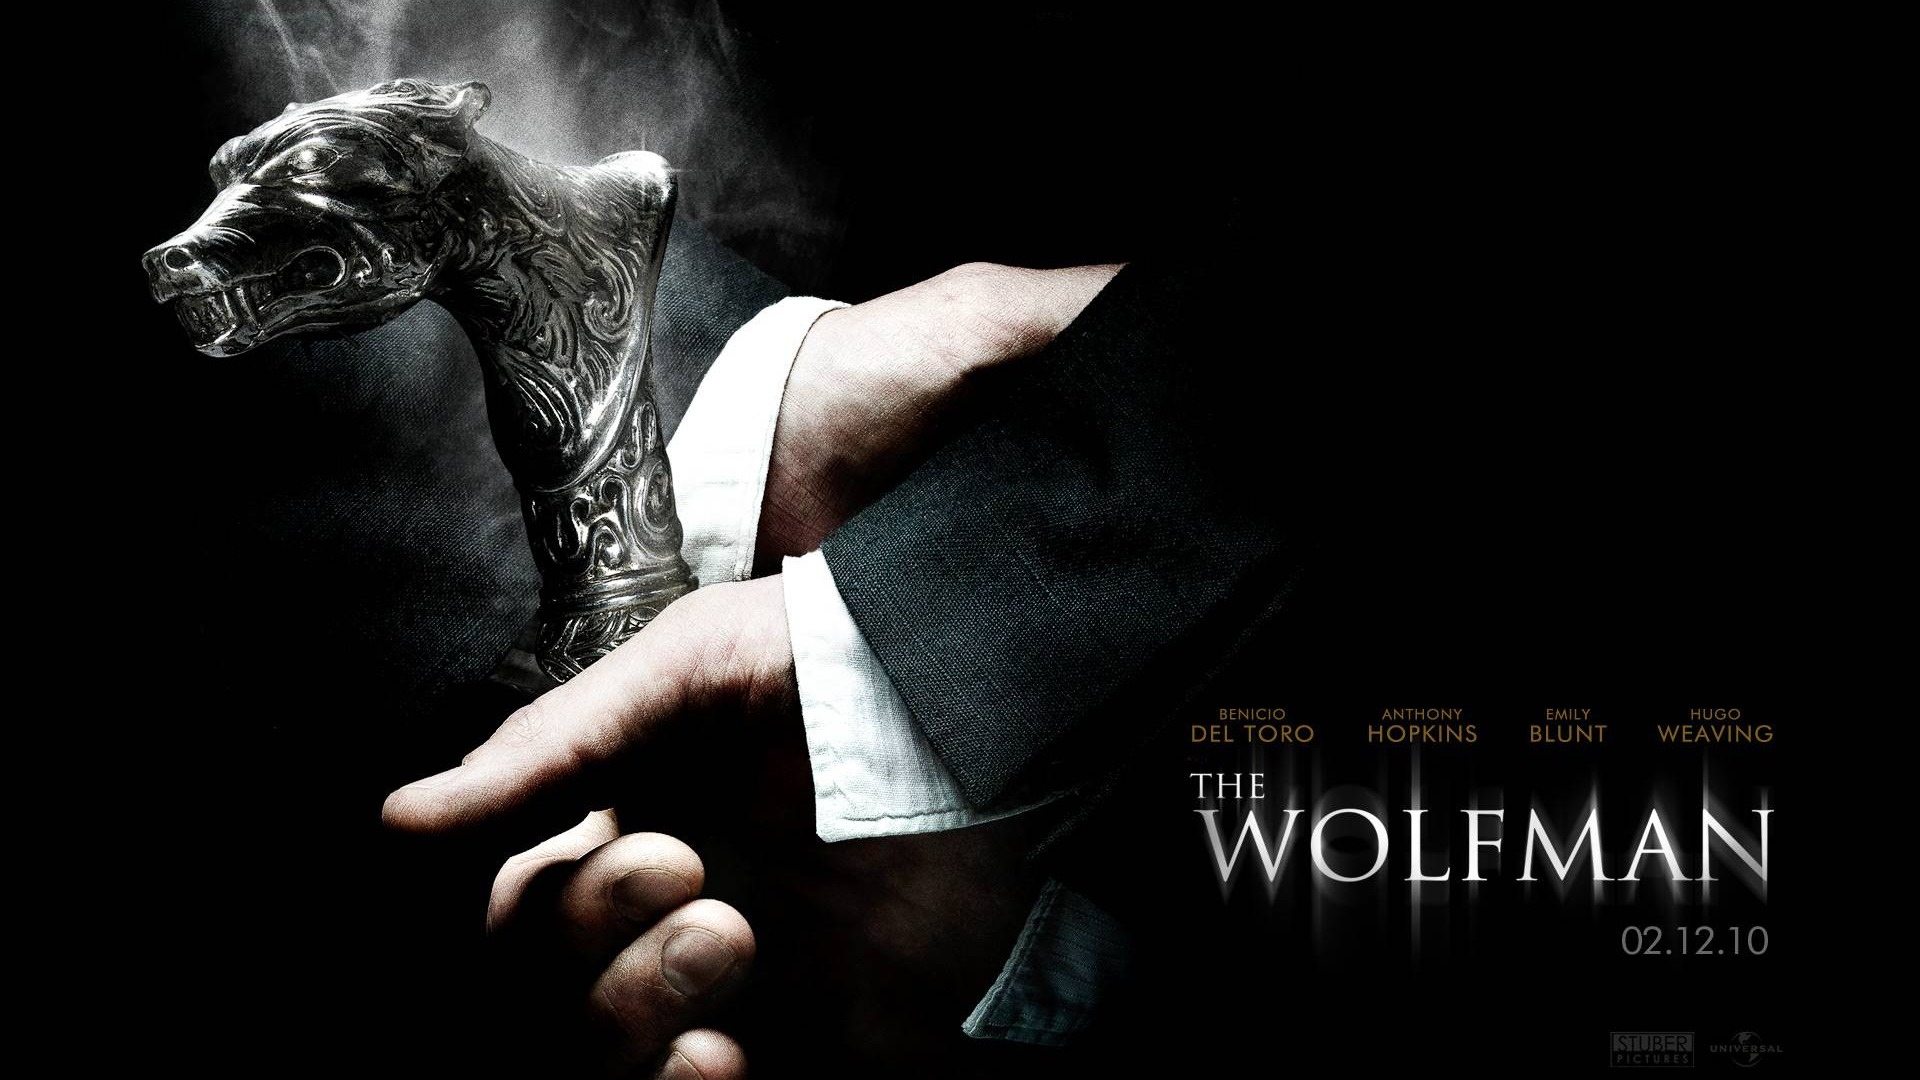 The Wolfman Movie Wallpapers #7 - 1920x1080